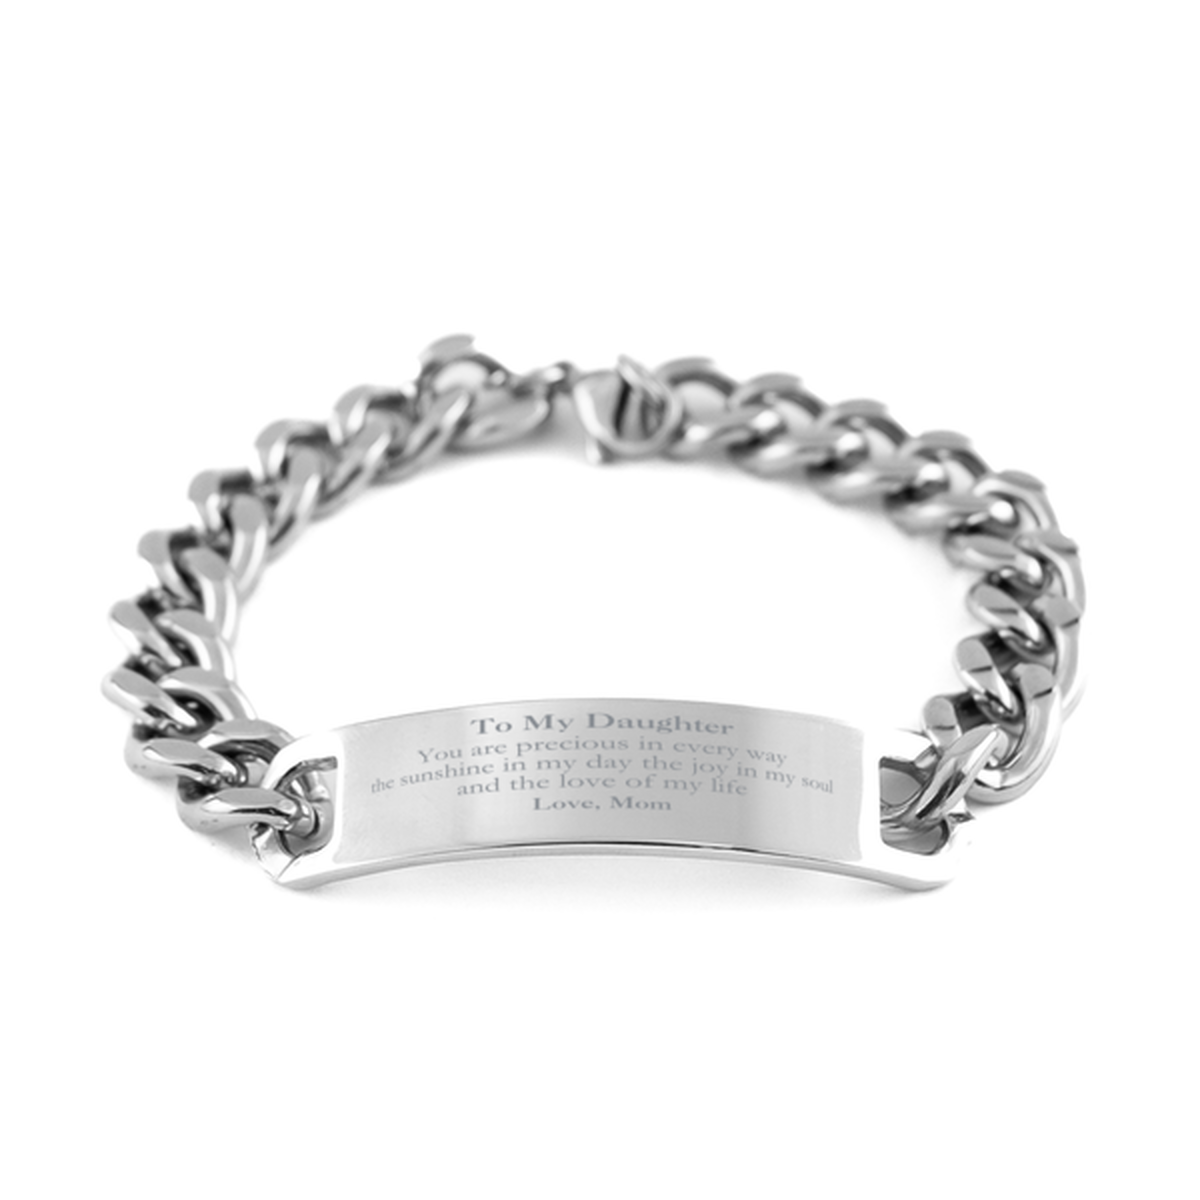 Graduation Gifts for Daughter Cuban Chain Stainless Steel Bracelet Present from Mom, Christmas Daughter Birthday Gifts Daughter You are precious in every way the sunshine in my day. Love, Mom